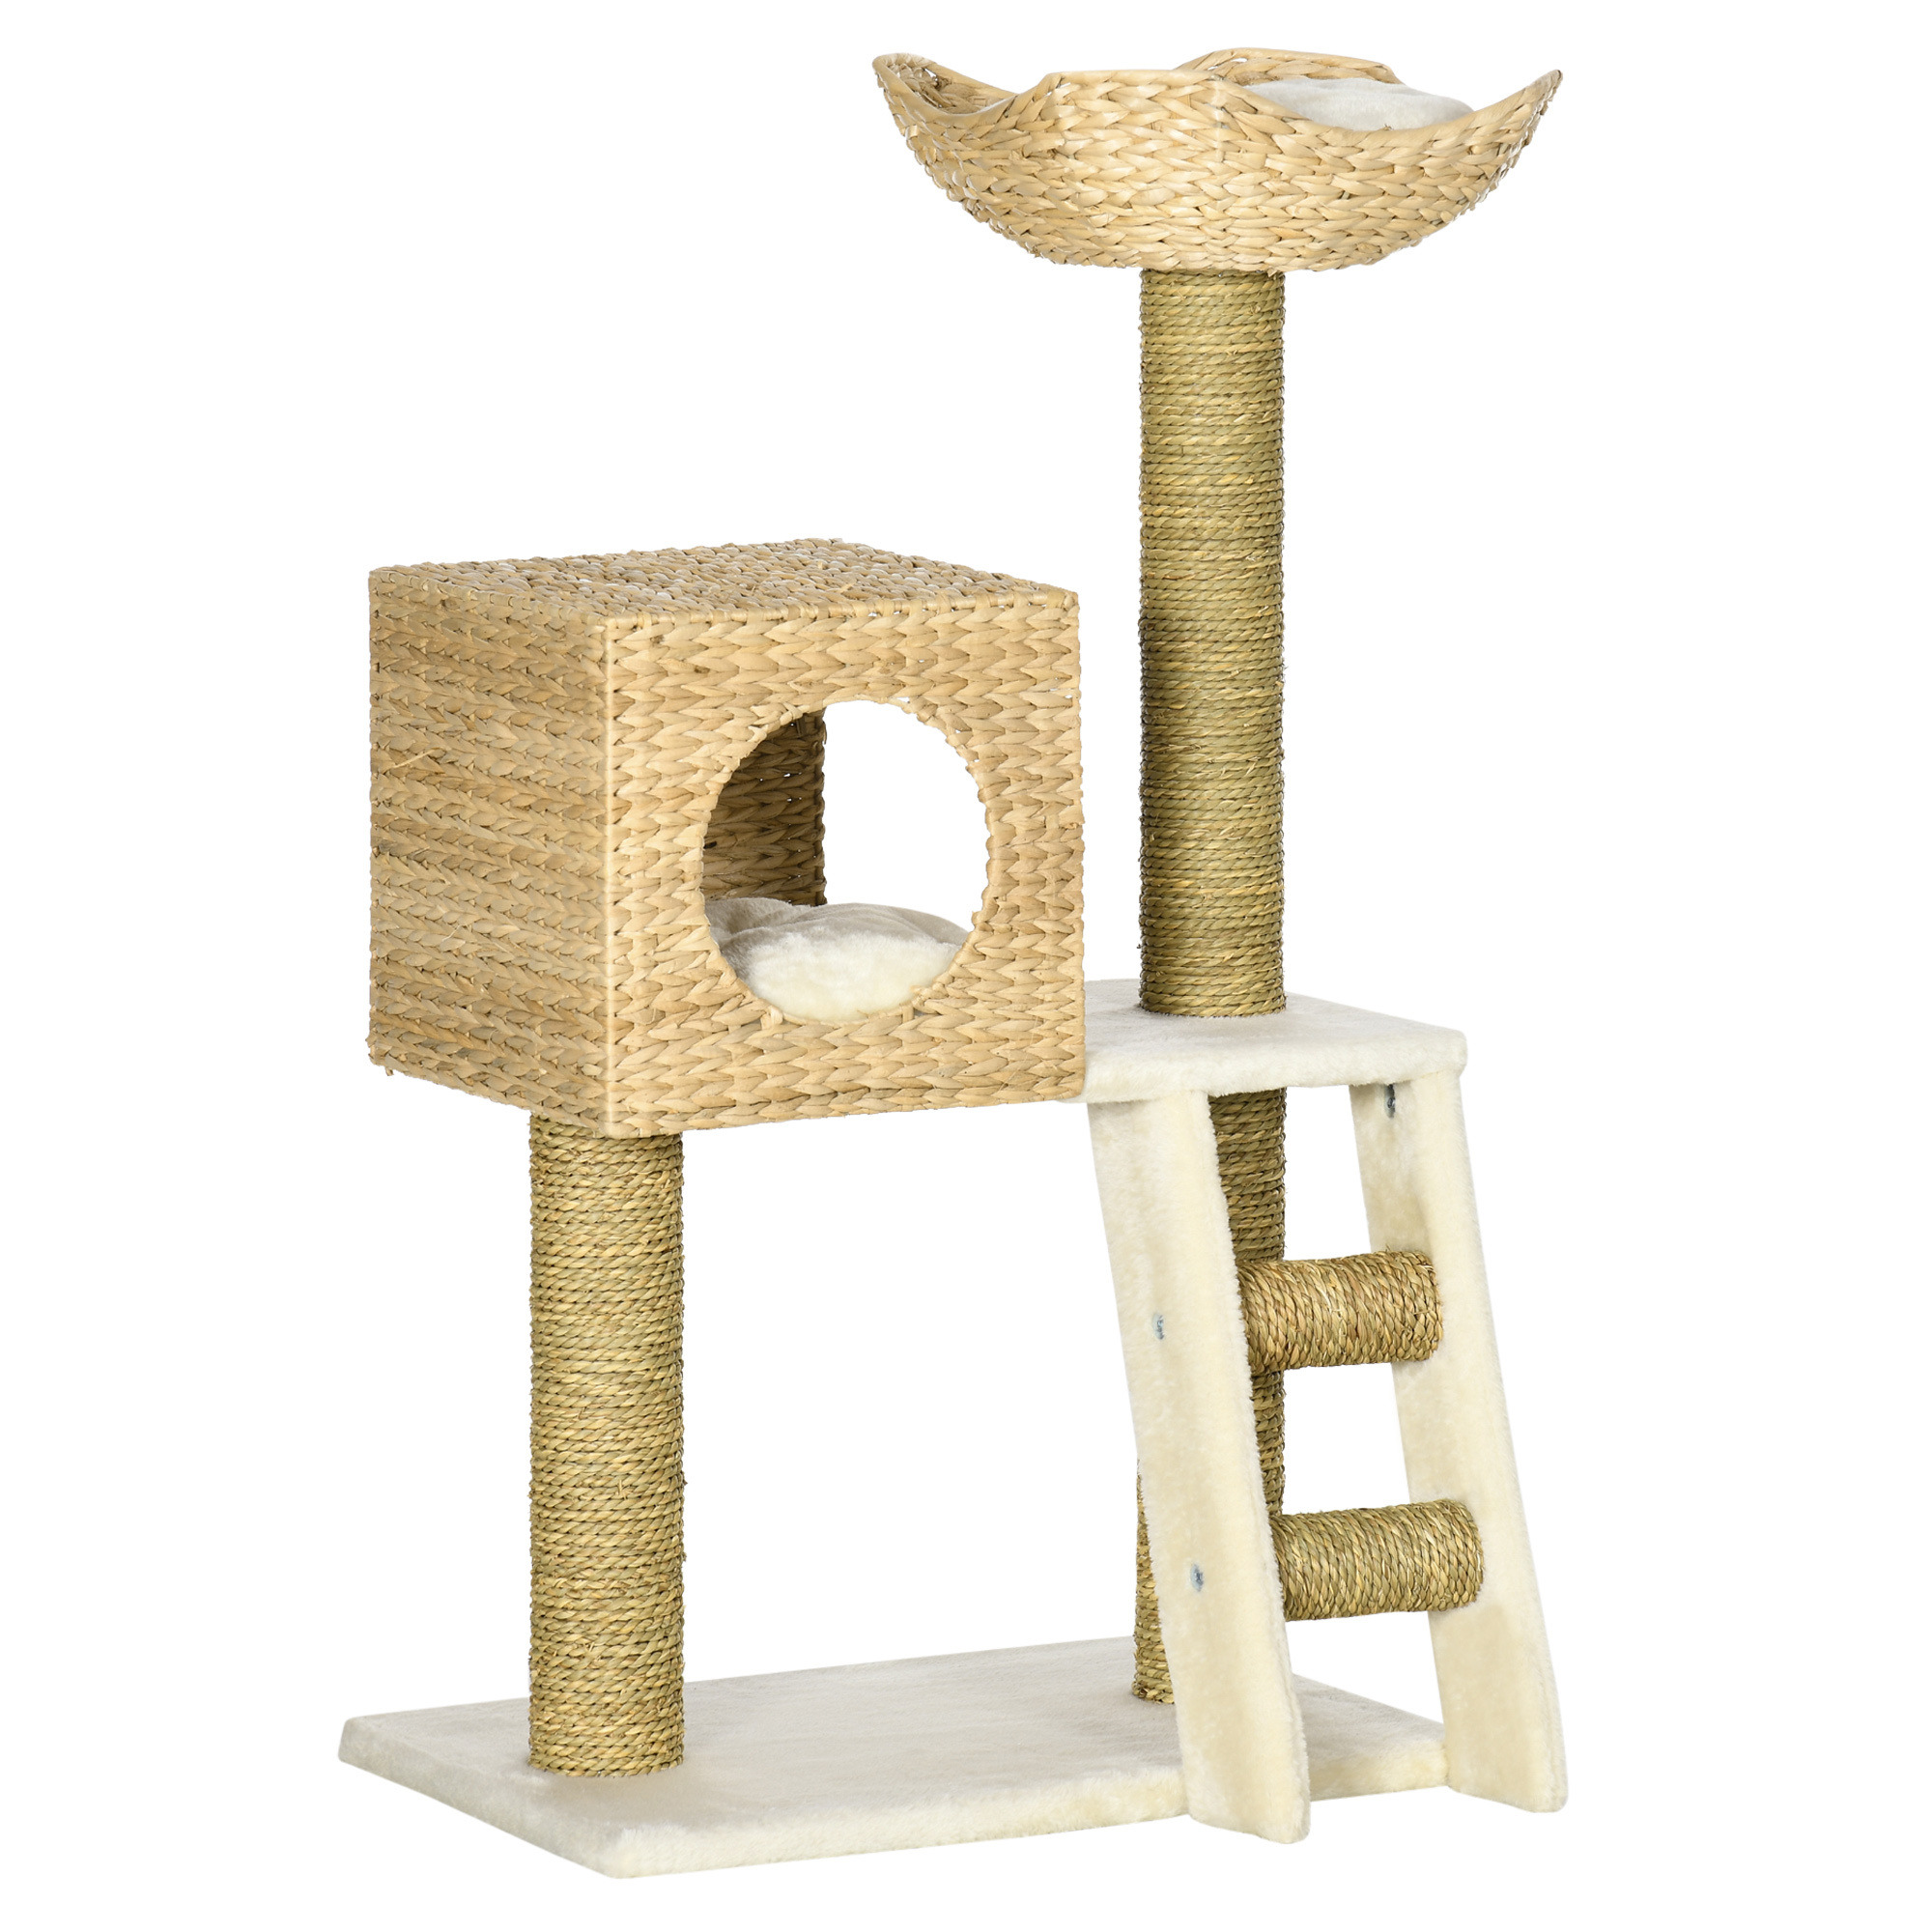 PawHut Cat Tree for Indoor Cats Kitten Tower Cattail Weave with Scratching Posts, Cat House, Bed， Washable Cushions Natural, 57 x 37 x 100.5 cm